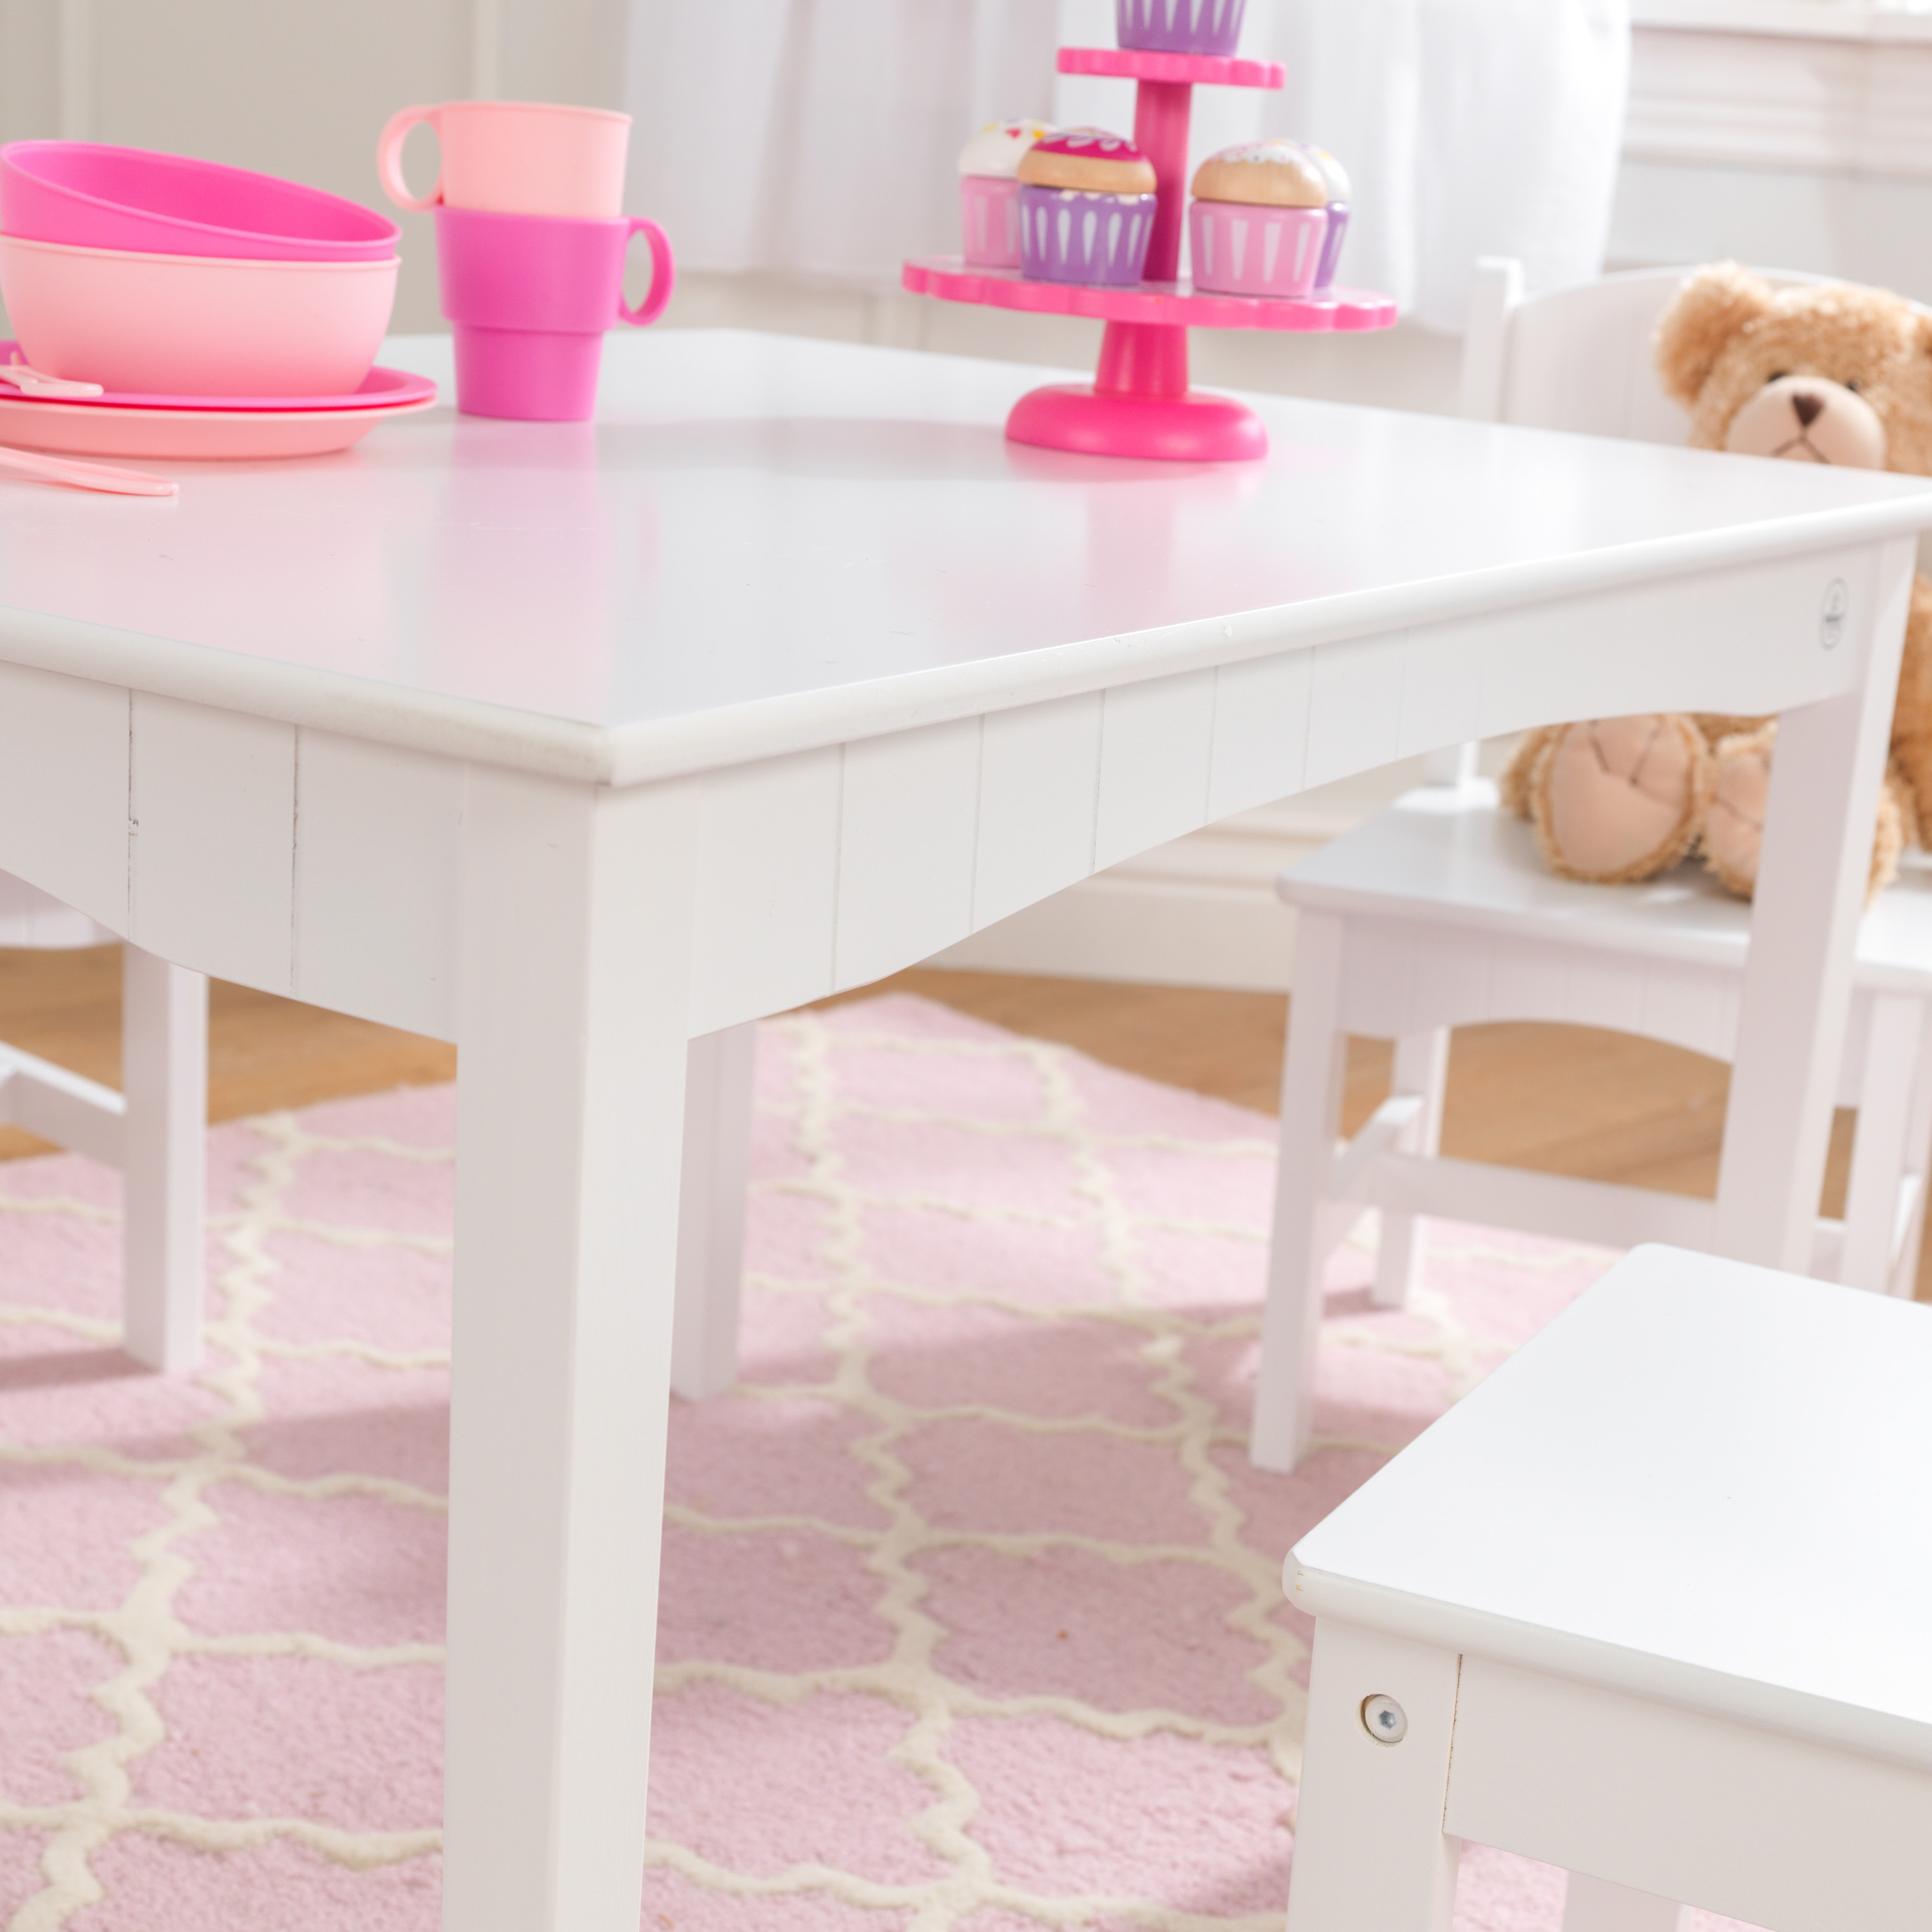 KidKraft Nantucket Wooden Table with Bench and 2 Chairs, Children's Furniture - White - image 5 of 8